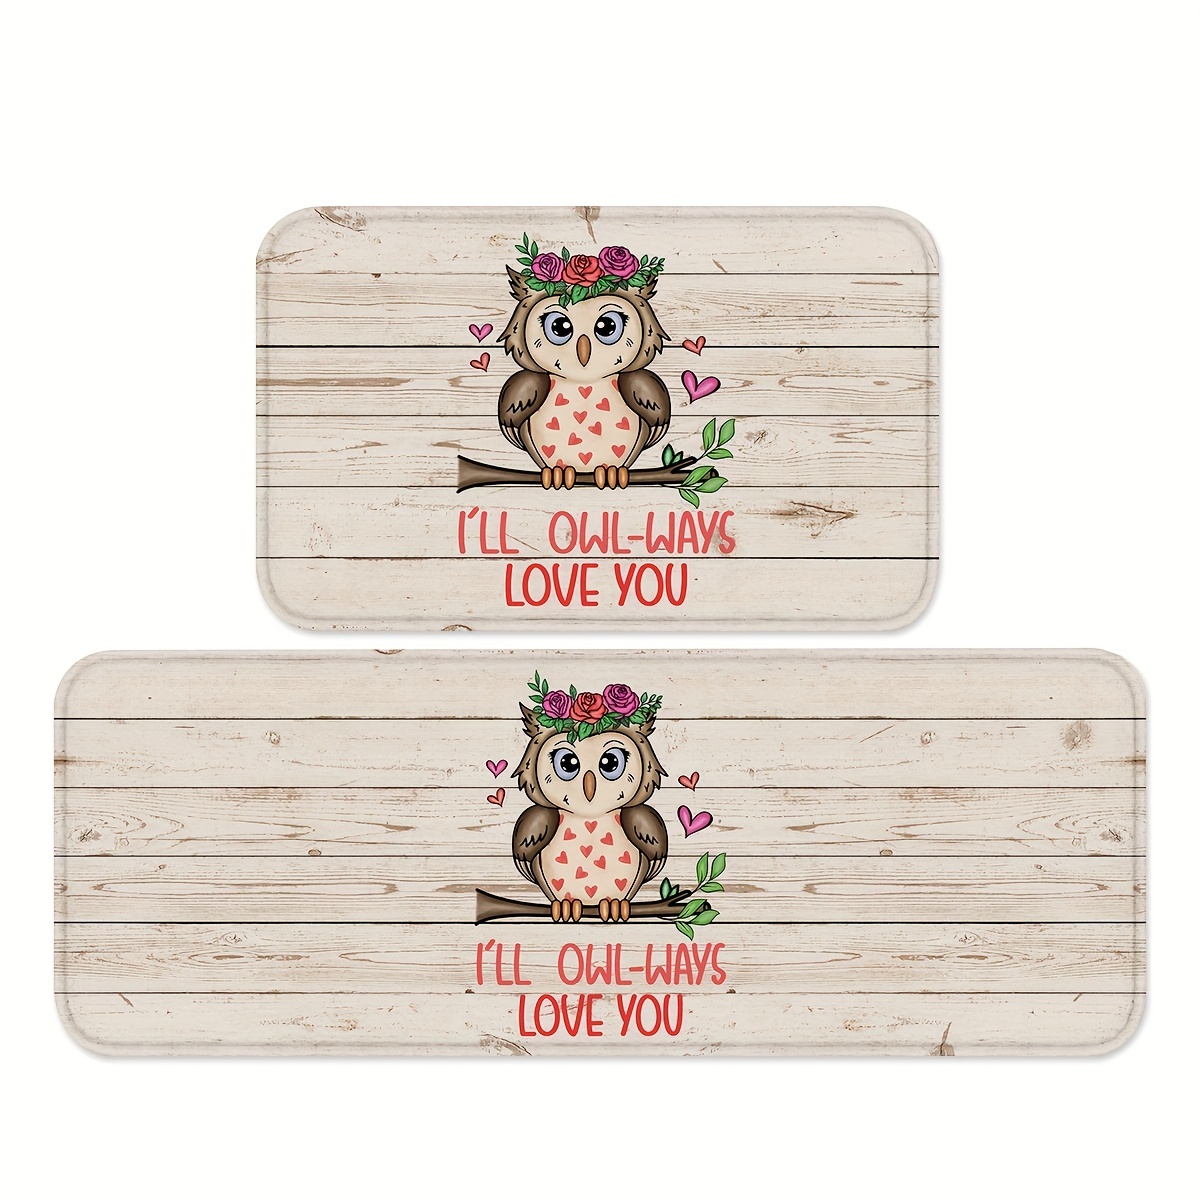 

1/2pcs Valentine's Day Kitchen Mats, Lovely Owl Rugs, Non-slip Bathroom Throw Rugs, Sofa Cushions, Comfortable Standing Runners, For Kitchen, Home, Office, Sink, Laundry, Bathroom, Sets 2 Piece